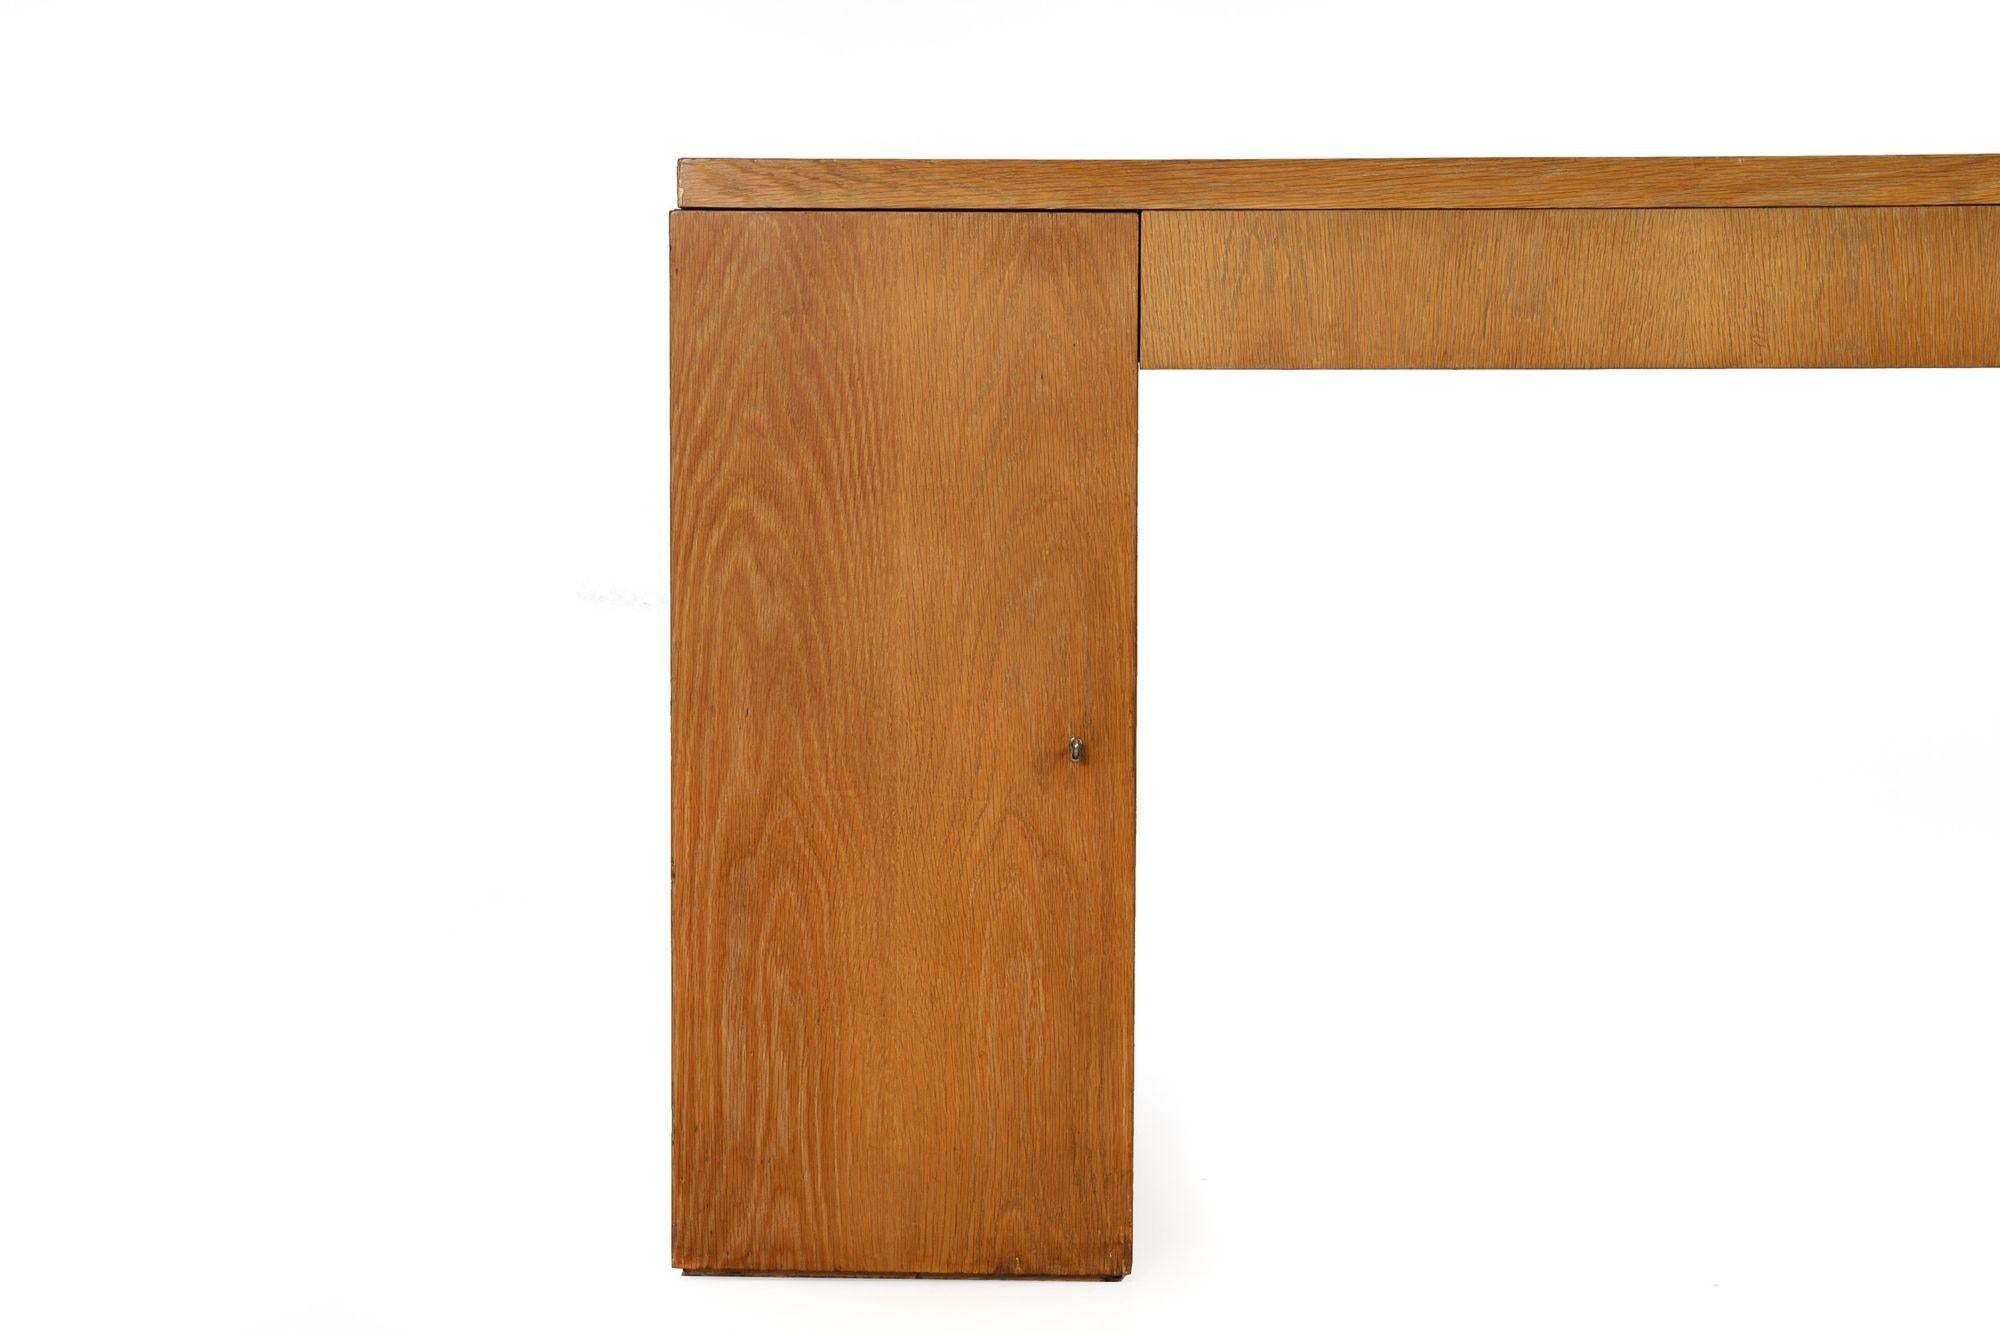 French Modernist Cerused Oak and Lacquered Skin Pedestal Desk ca. 1950s For Sale 4